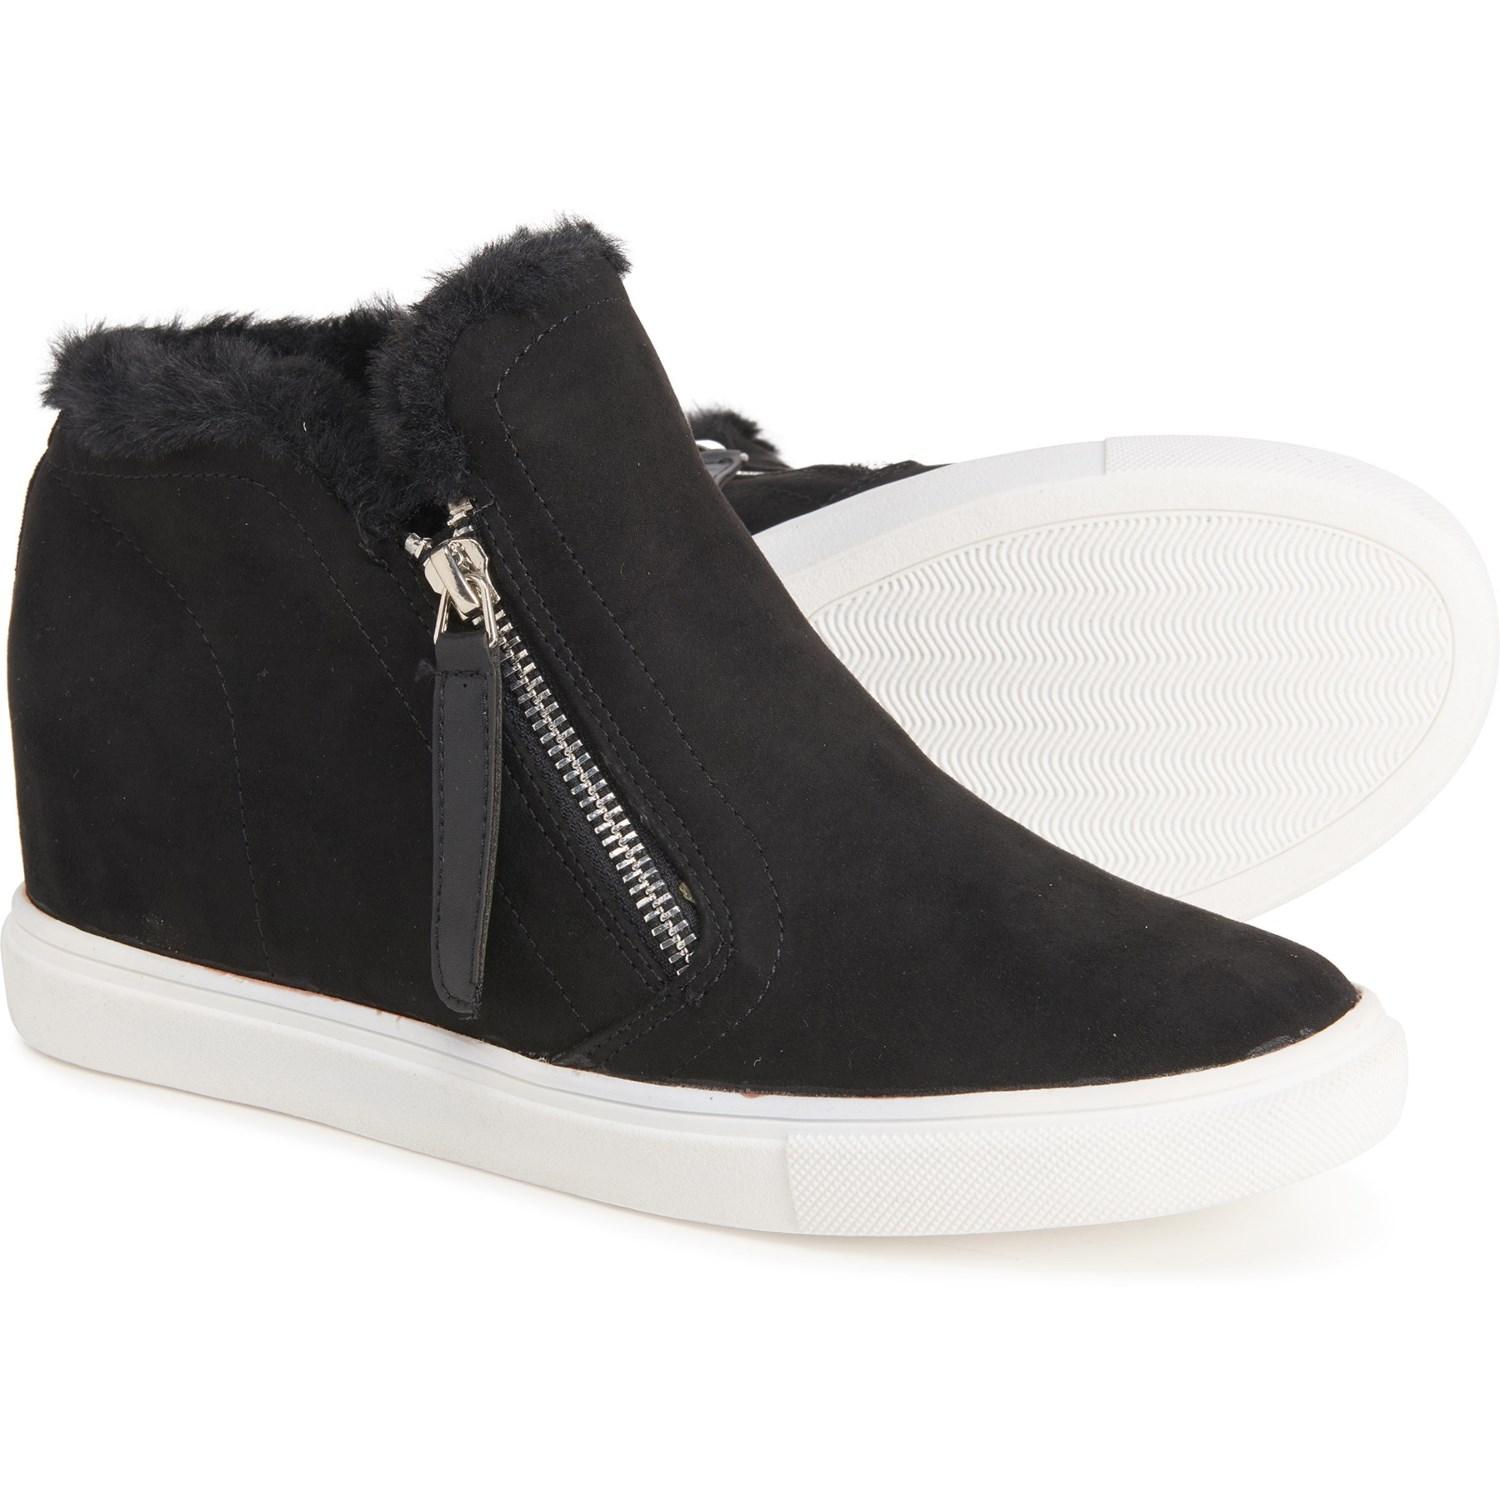 Madden Girl Prevale Cozy-lined Wedge Sneakers in Black - Lyst